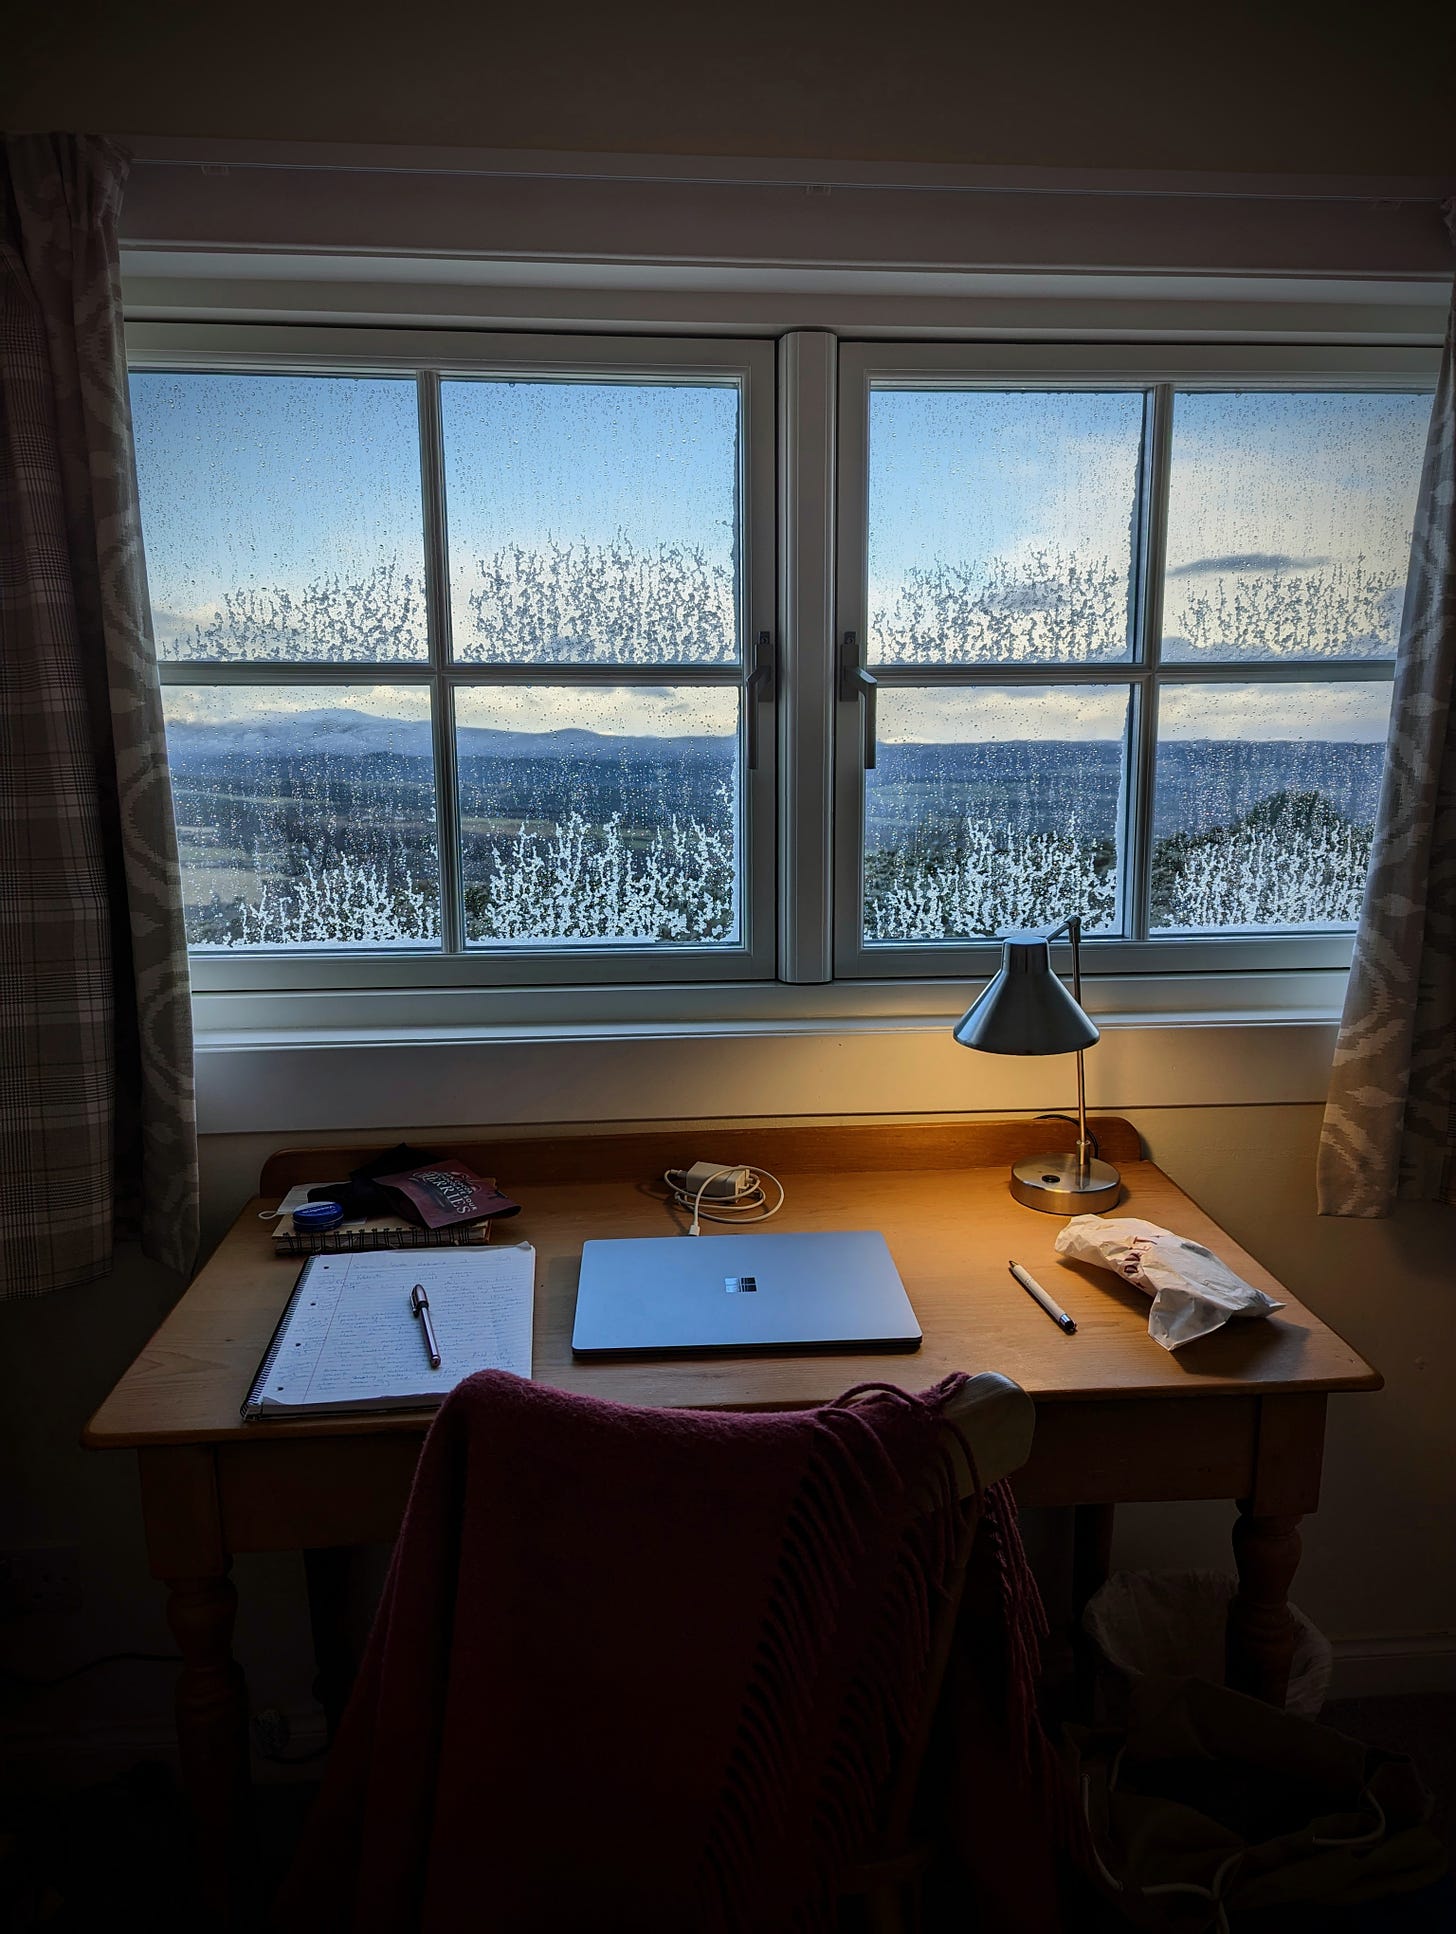 A photo of a wooden desk under a cottage window. The desk has a laptop, a lamp casting a warm glow, a notepad and pen, and some oddments. A chair has a cosy wool blanket thrown over it. Through the window, a valley and distant hills can be seen, and the glass is patterned with frost. 